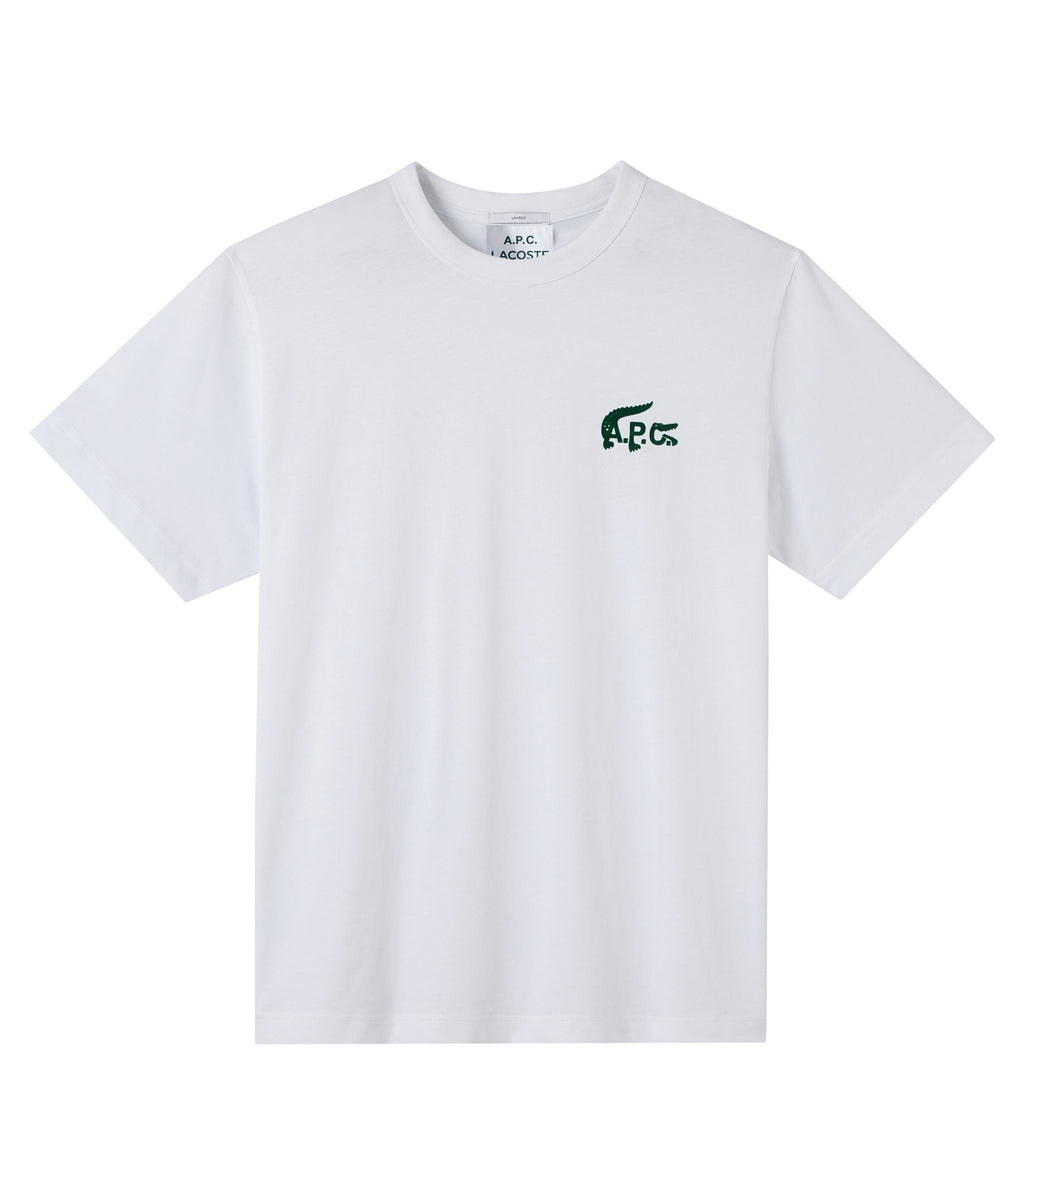 A.P.C. x Lacoste Small Logo T-shirt White - SS22 - US